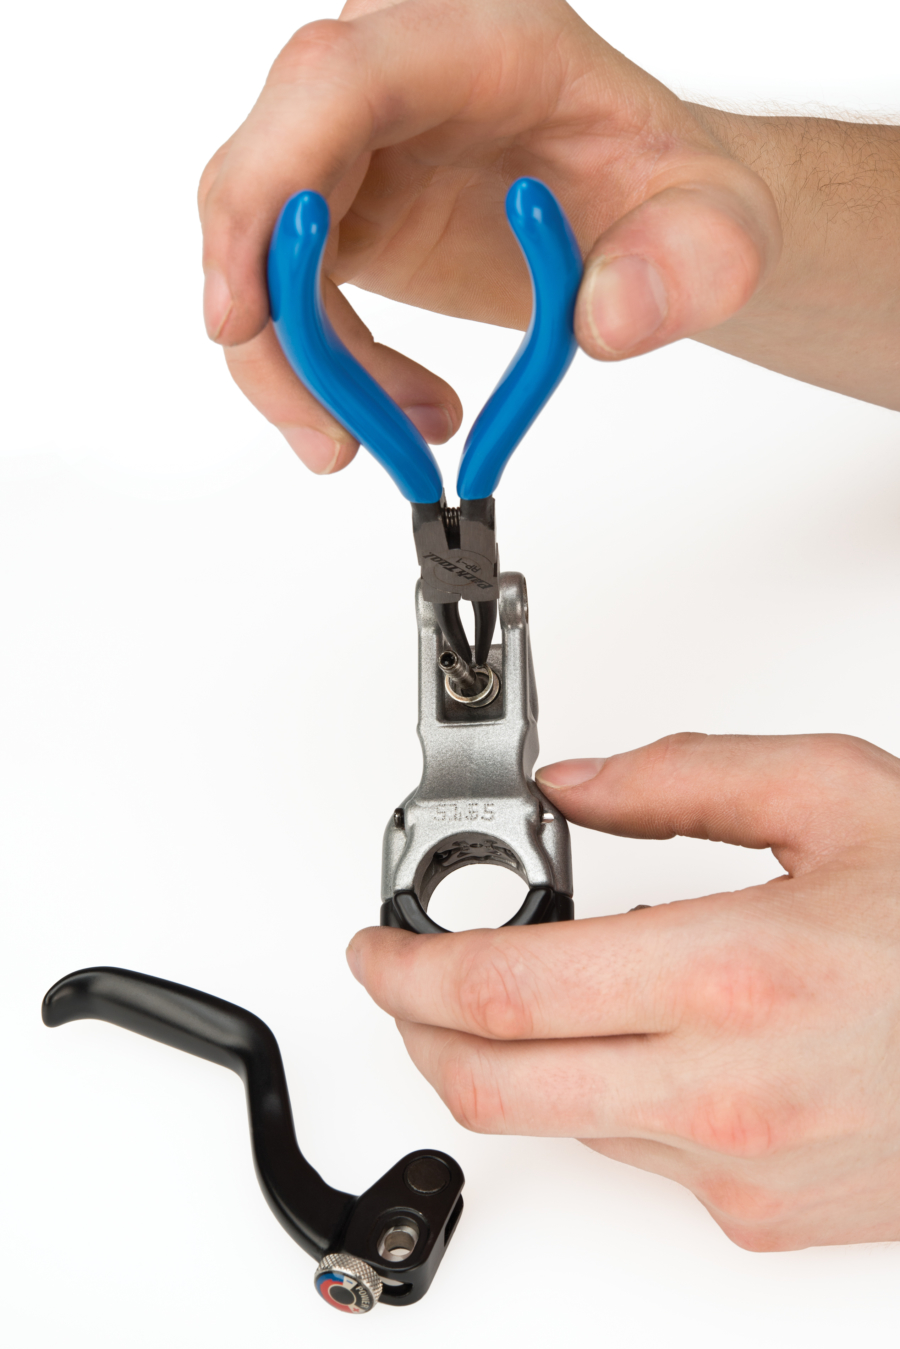 The Park Tool RP-1 0.9mm Internal Retaining Ring Pliers removing snap ring from brake lever body, enlarged